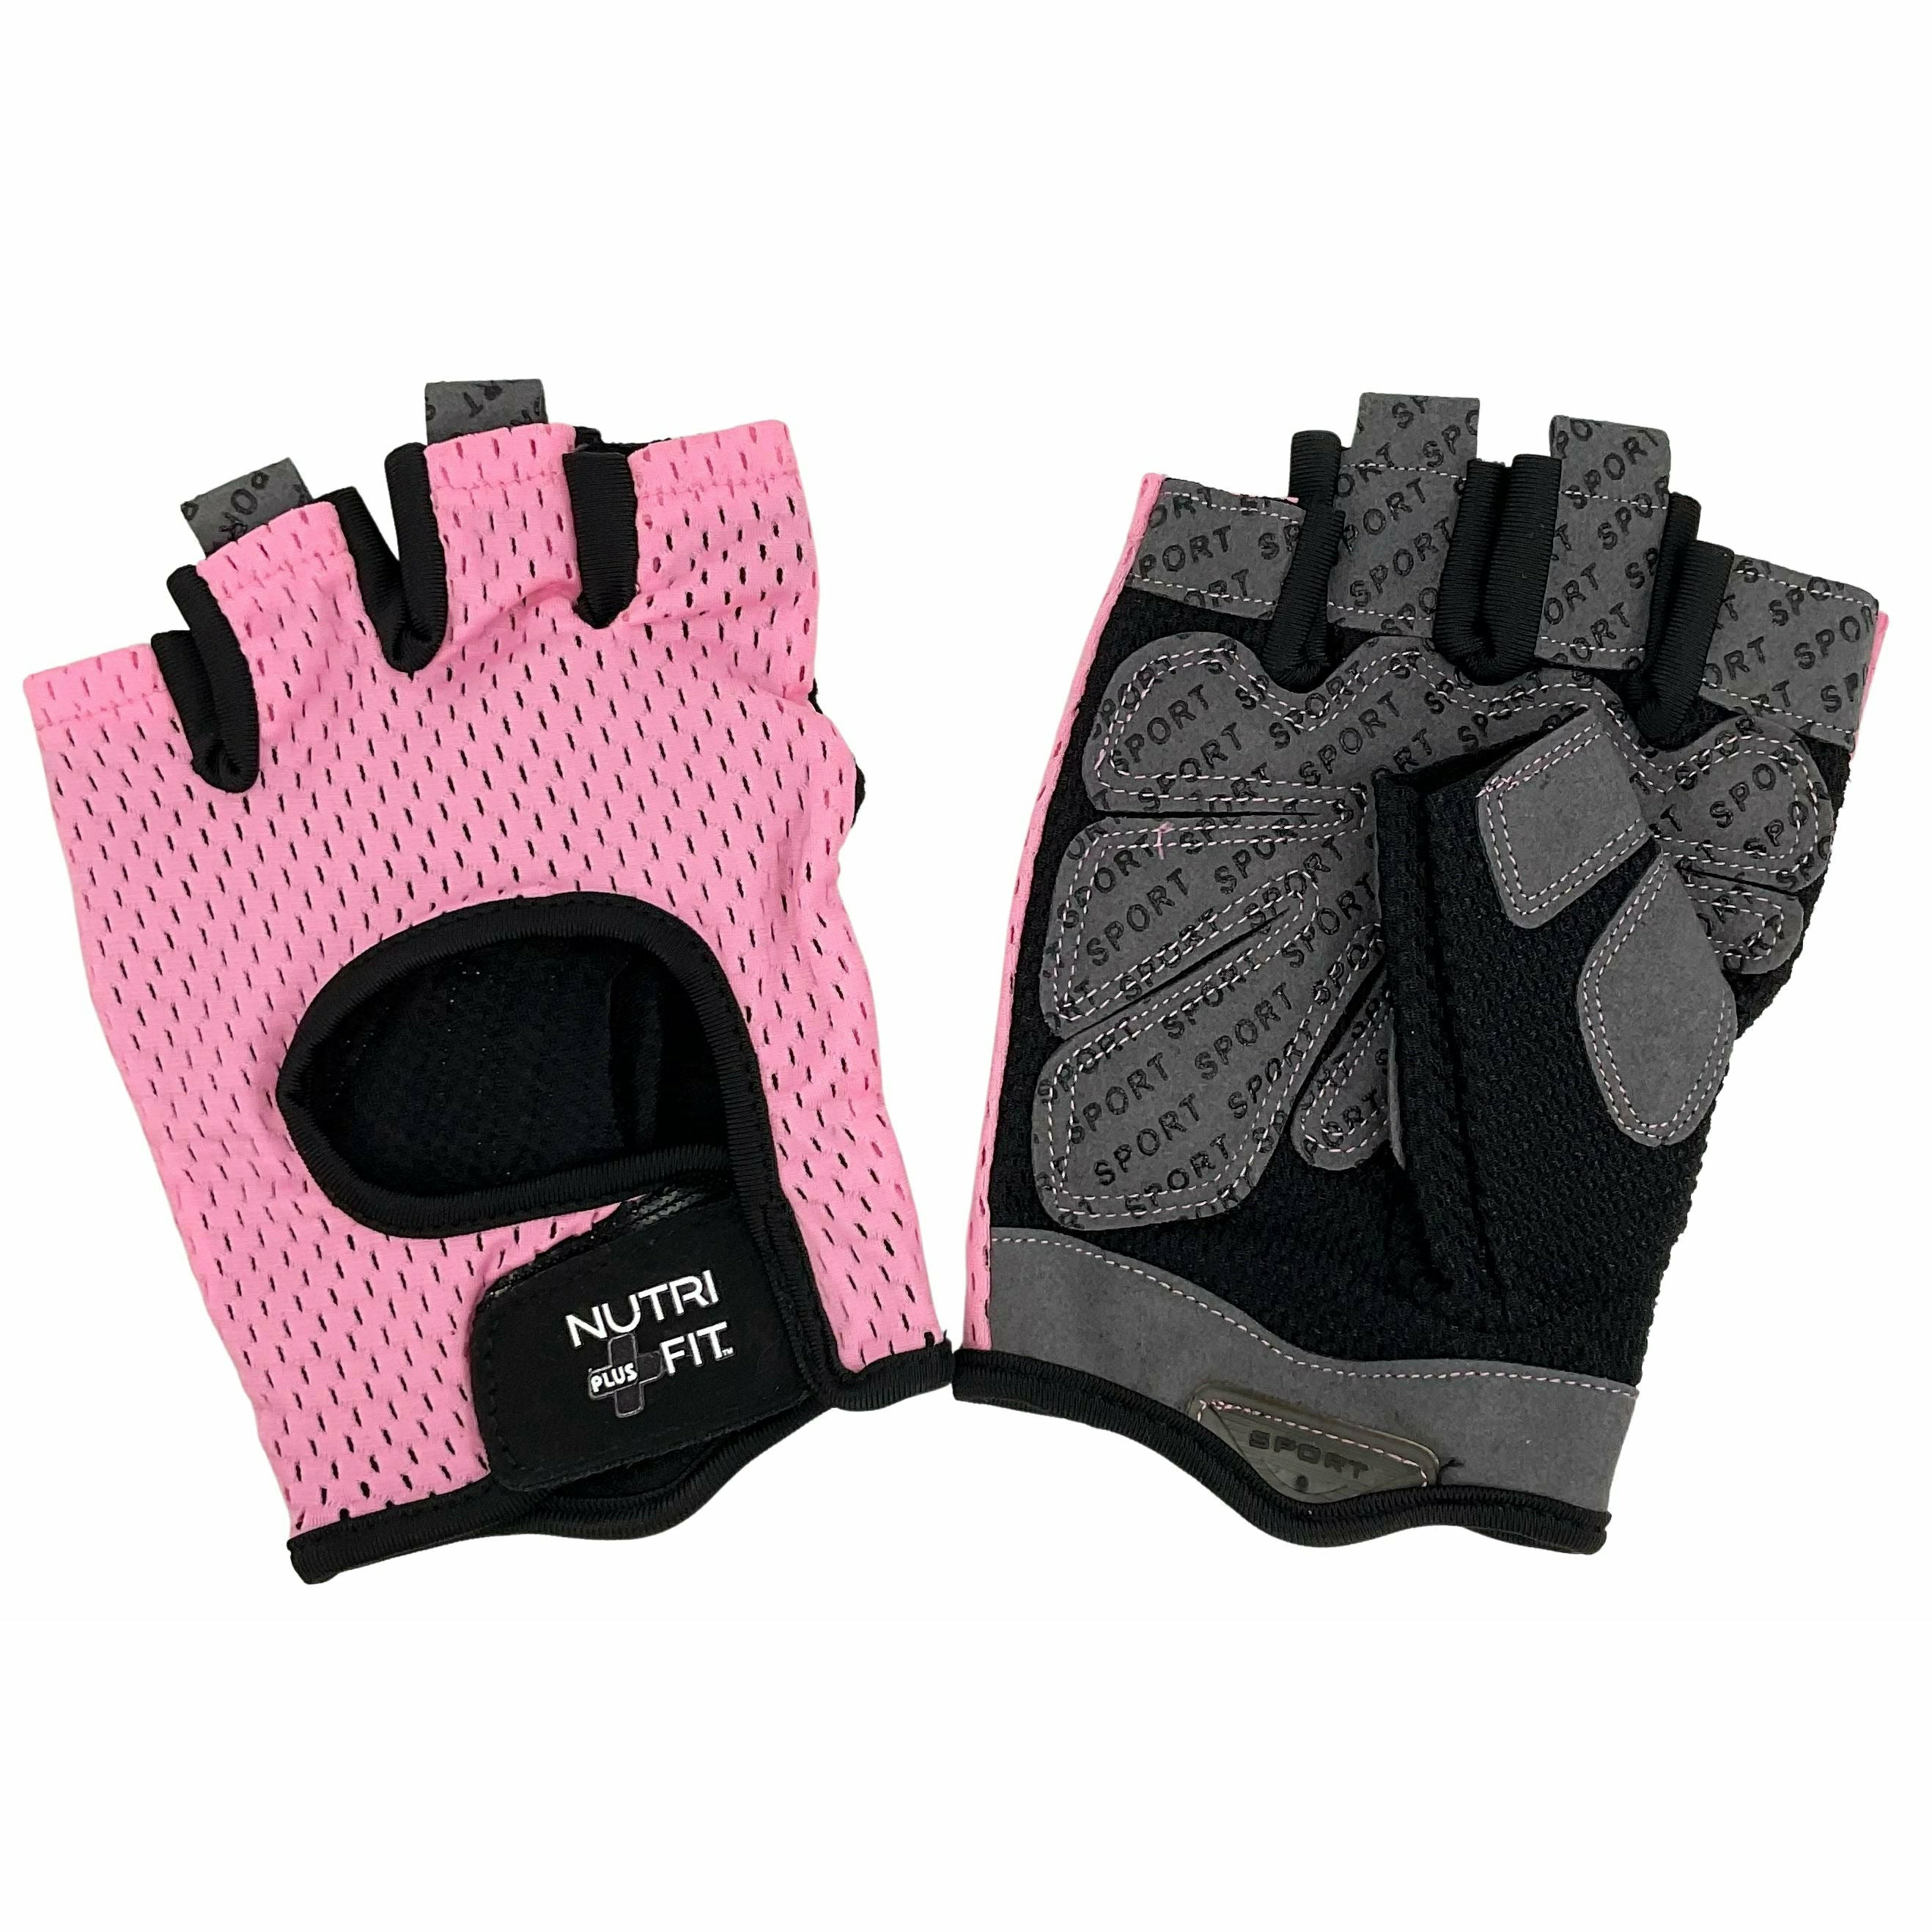 Nutri Fit Plus Unisex Workout Gloves for Weight Lifting-Gym Exercise-Cycling-Full Palm Protection-Extra Grip for Men and Women